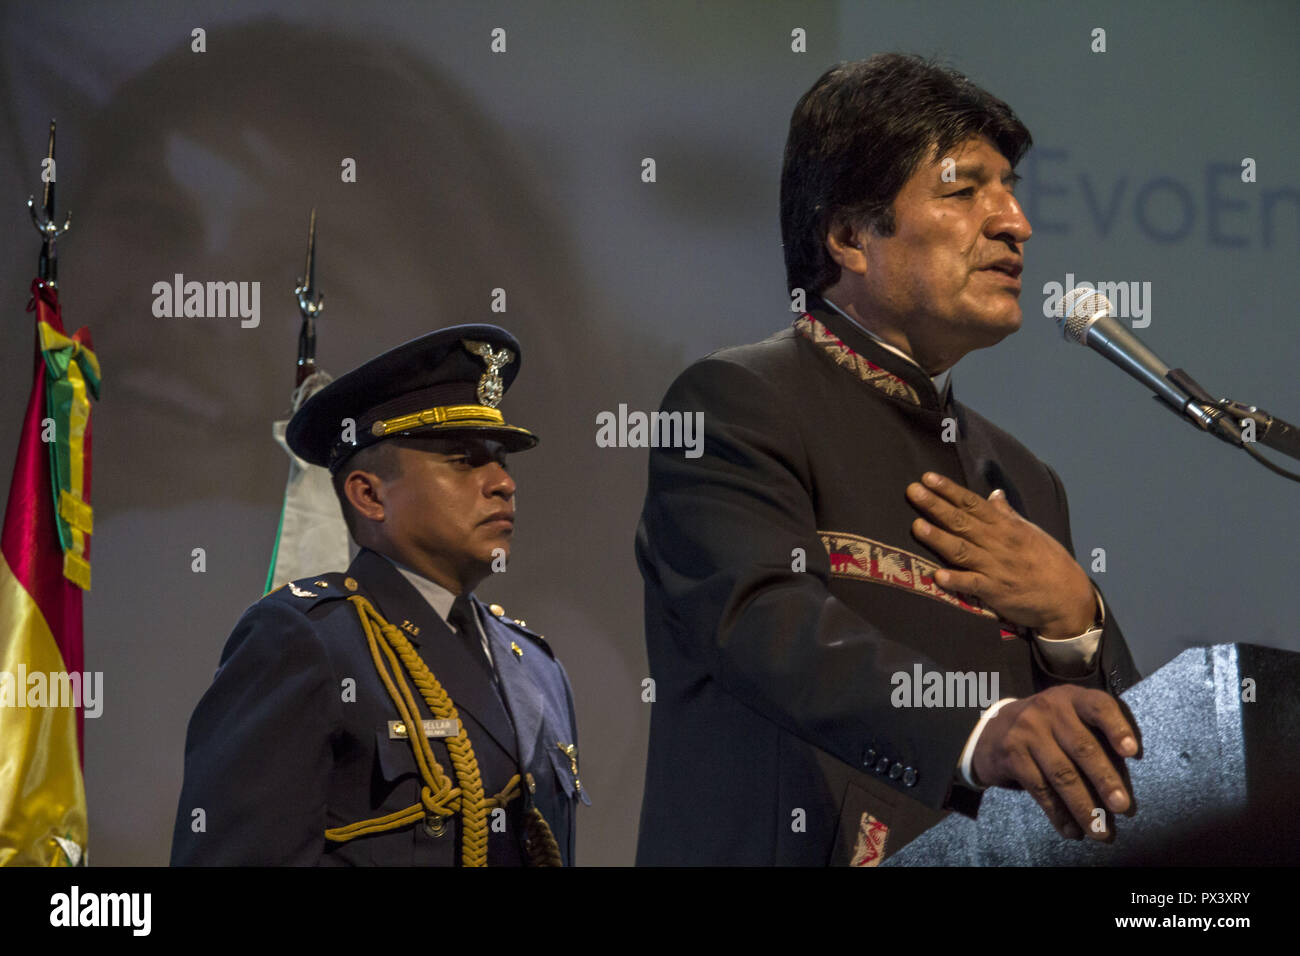 Buenos Aires, Federal Capital, Argentina. 19th Oct, 2018. The president of Bolivia, Evo Morales, was distinguished with the Doctorate Honoris Causa at the Metropolitan University for Education and Labor (UMET). The house of studies of the workers of the union of building managers recognized the trajectory and the actions of the Bolivian leader in the promotion of education and social inclusion as an equalizing factor. Credit: Roberto Almeida Aveledo/ZUMA Wire/Alamy Live News Stock Photo